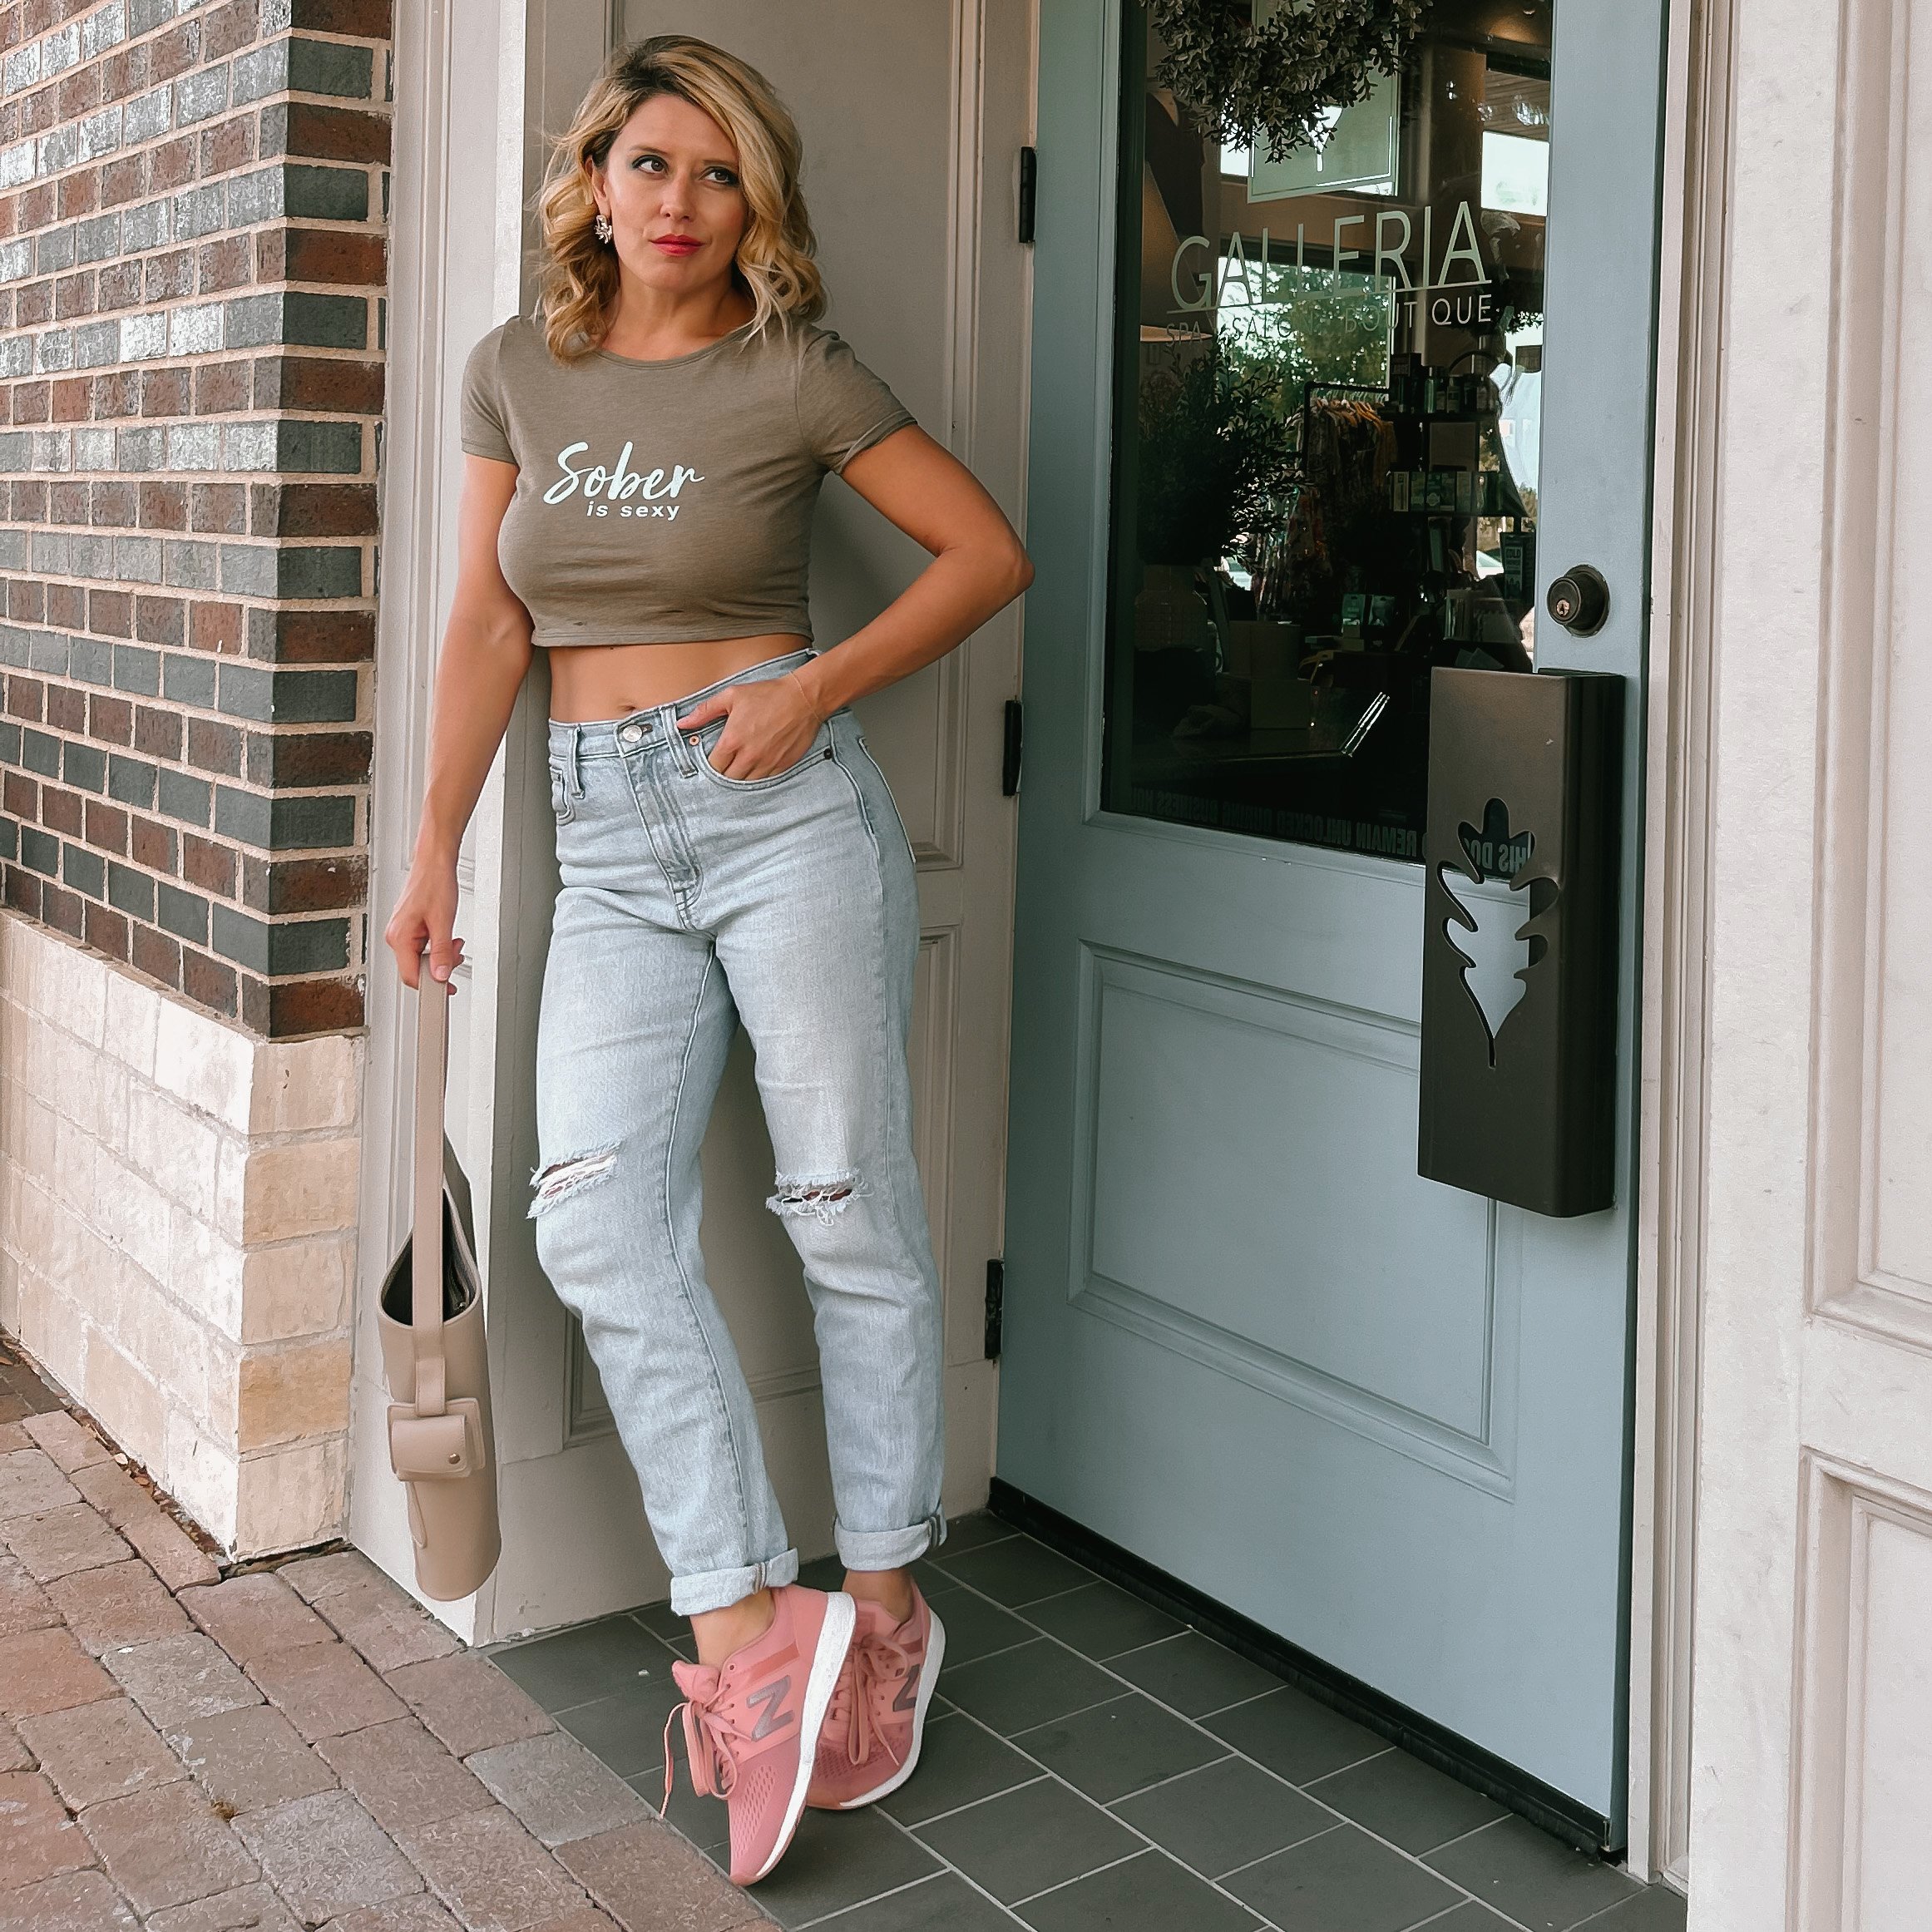 Three Heel Clicks - The New SOBER IS SEXY Cropped Tee Drops Today